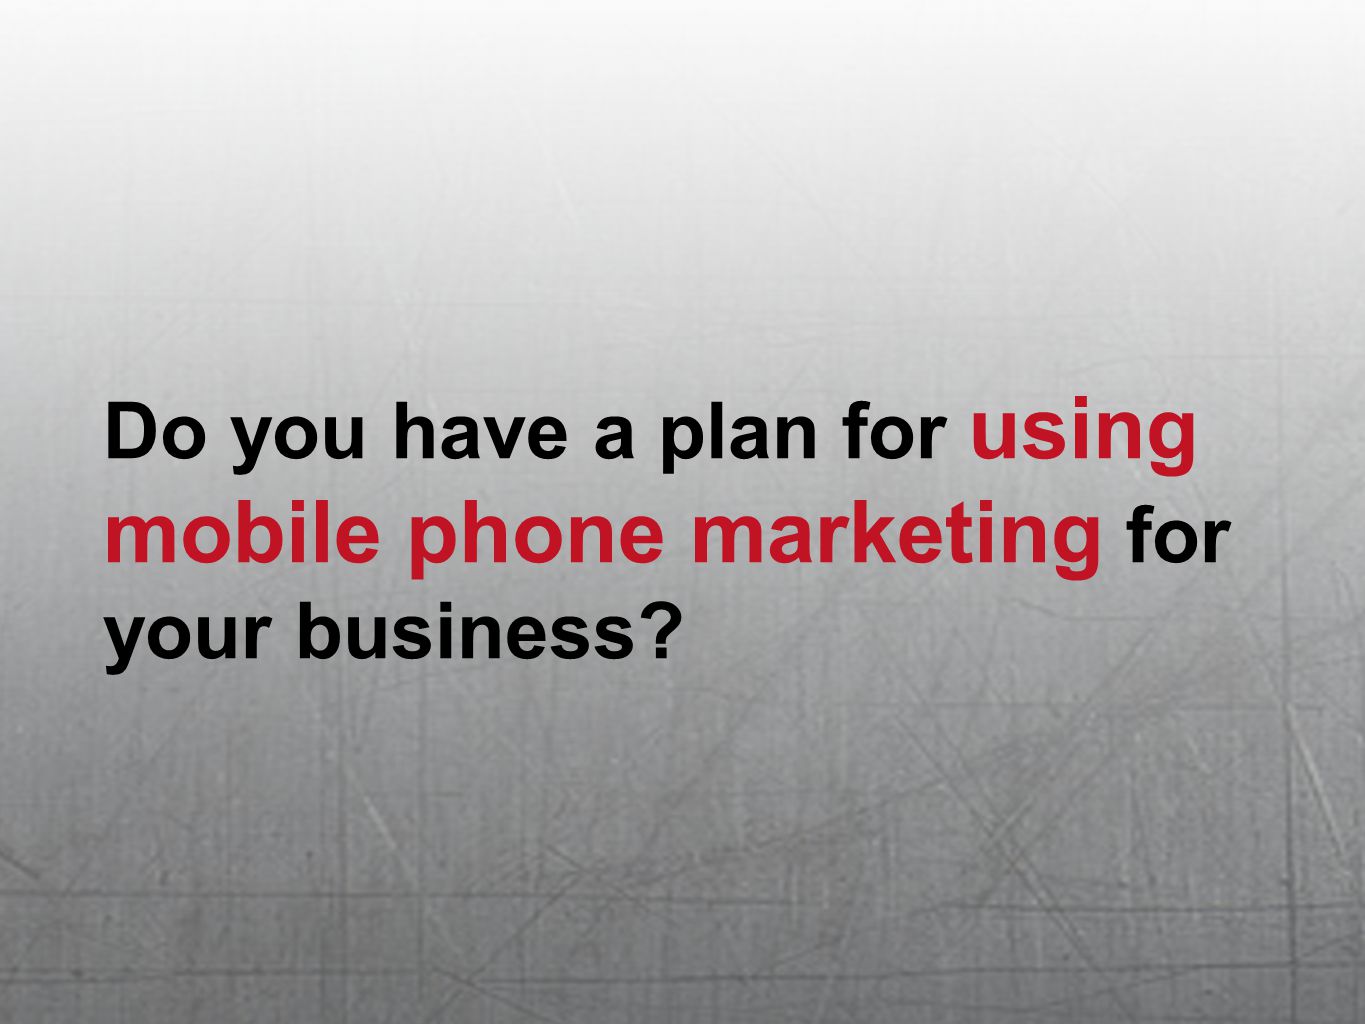 Do you have a plan for using mobile phone marketing for your business